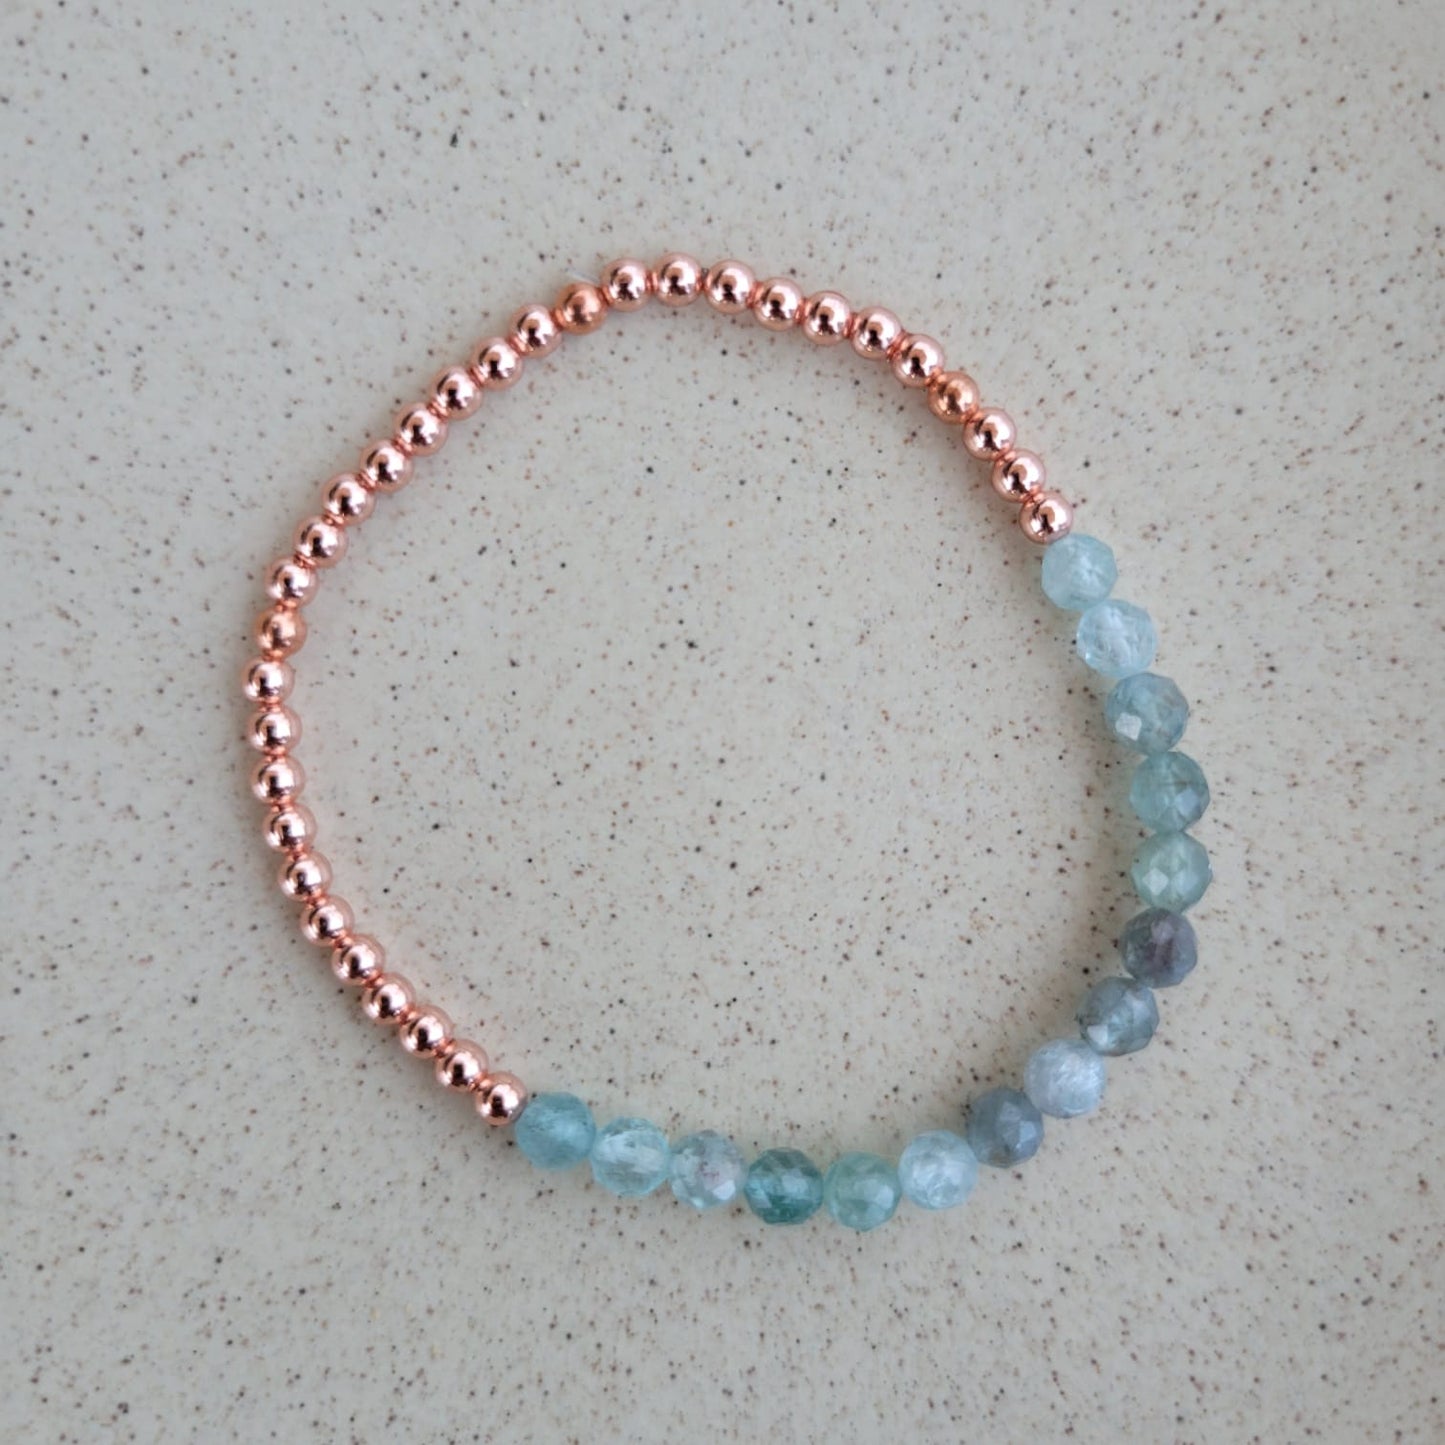 Dainty and Elegant Multi-Faceted Blue Apatite beads + Genuine and solid 3mm Copper Bead Bracelet - Stretchy and Stackable